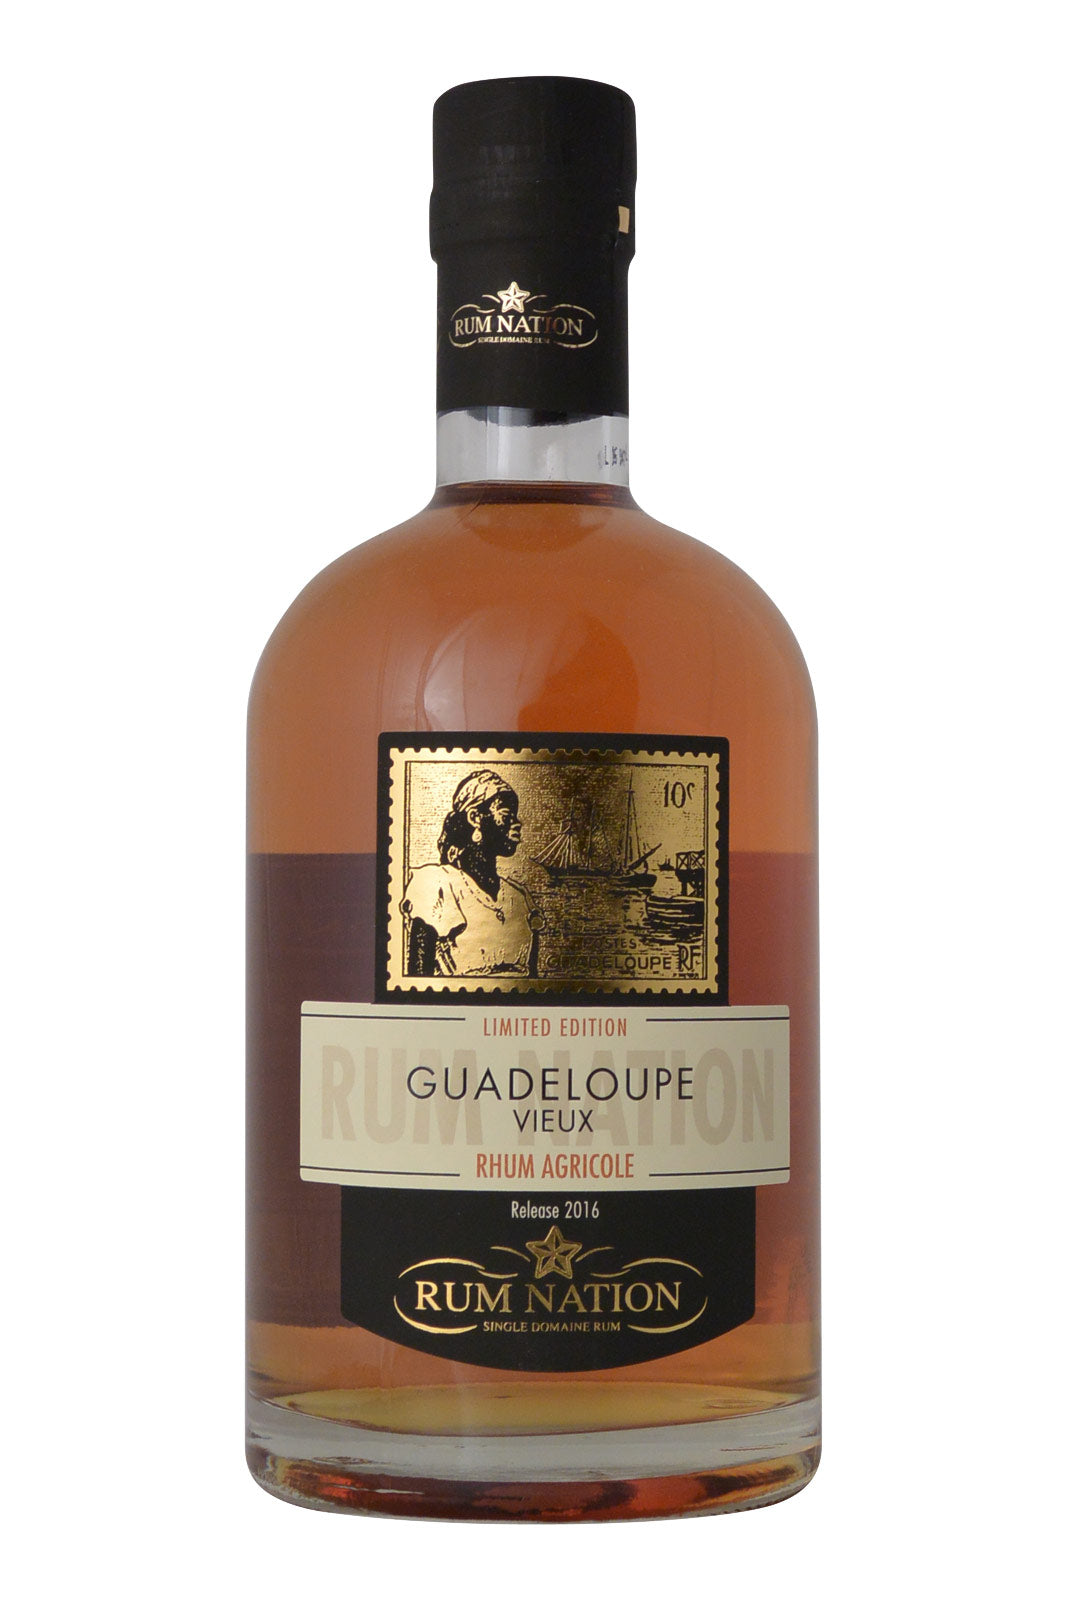 Rum Nation Guadeloupe Vieux